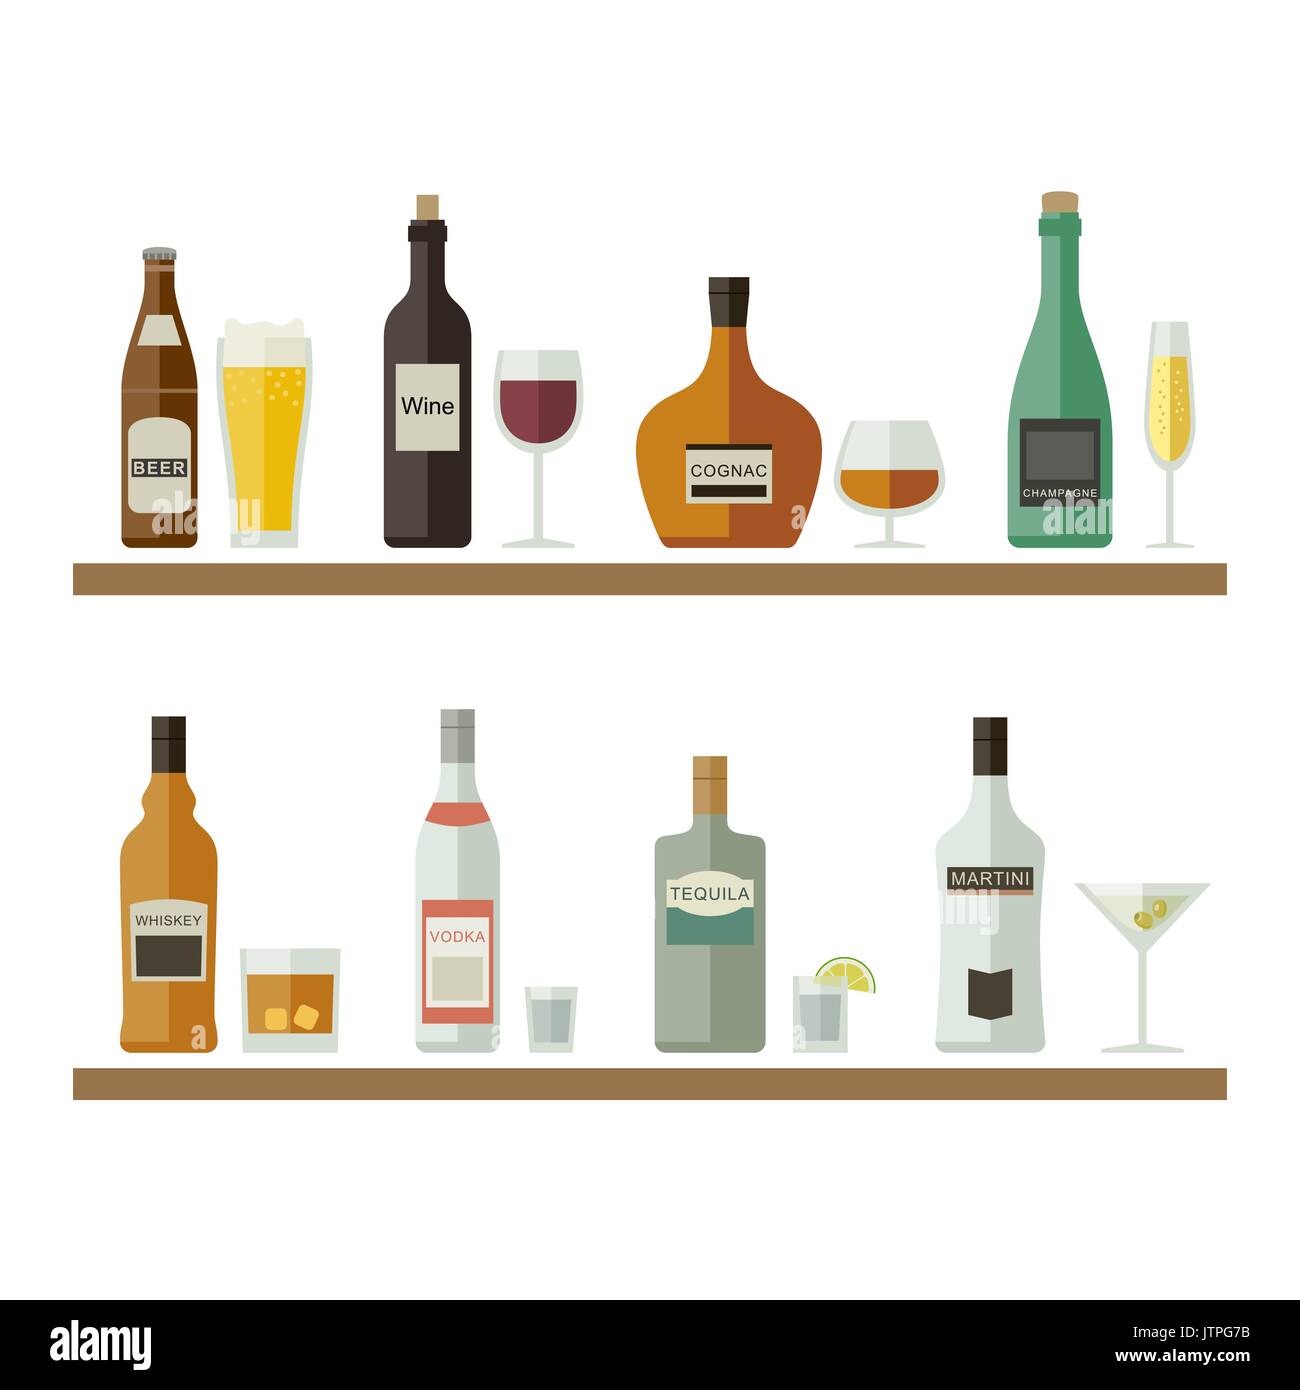 Alcoholic beverages and drinks. Stock Vector